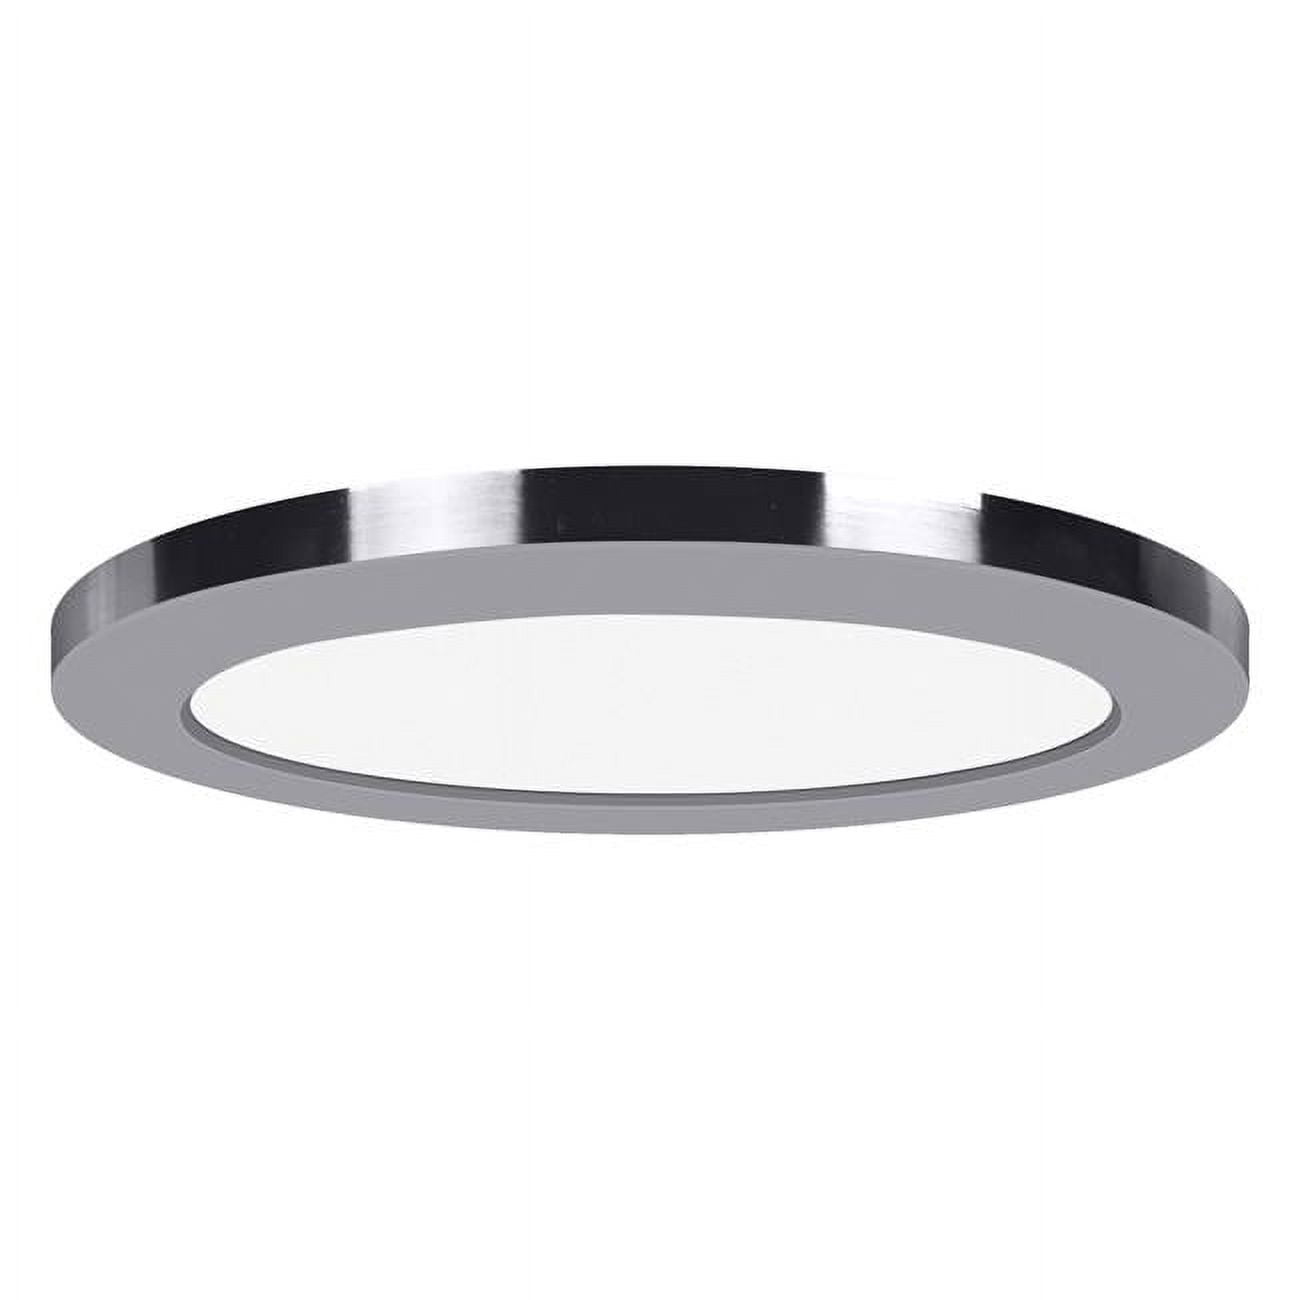 Picture of Access Lighting 20832TRIM-CH 12 in. ModPLUS Chrome Trim Recessed for 20832 & 20838